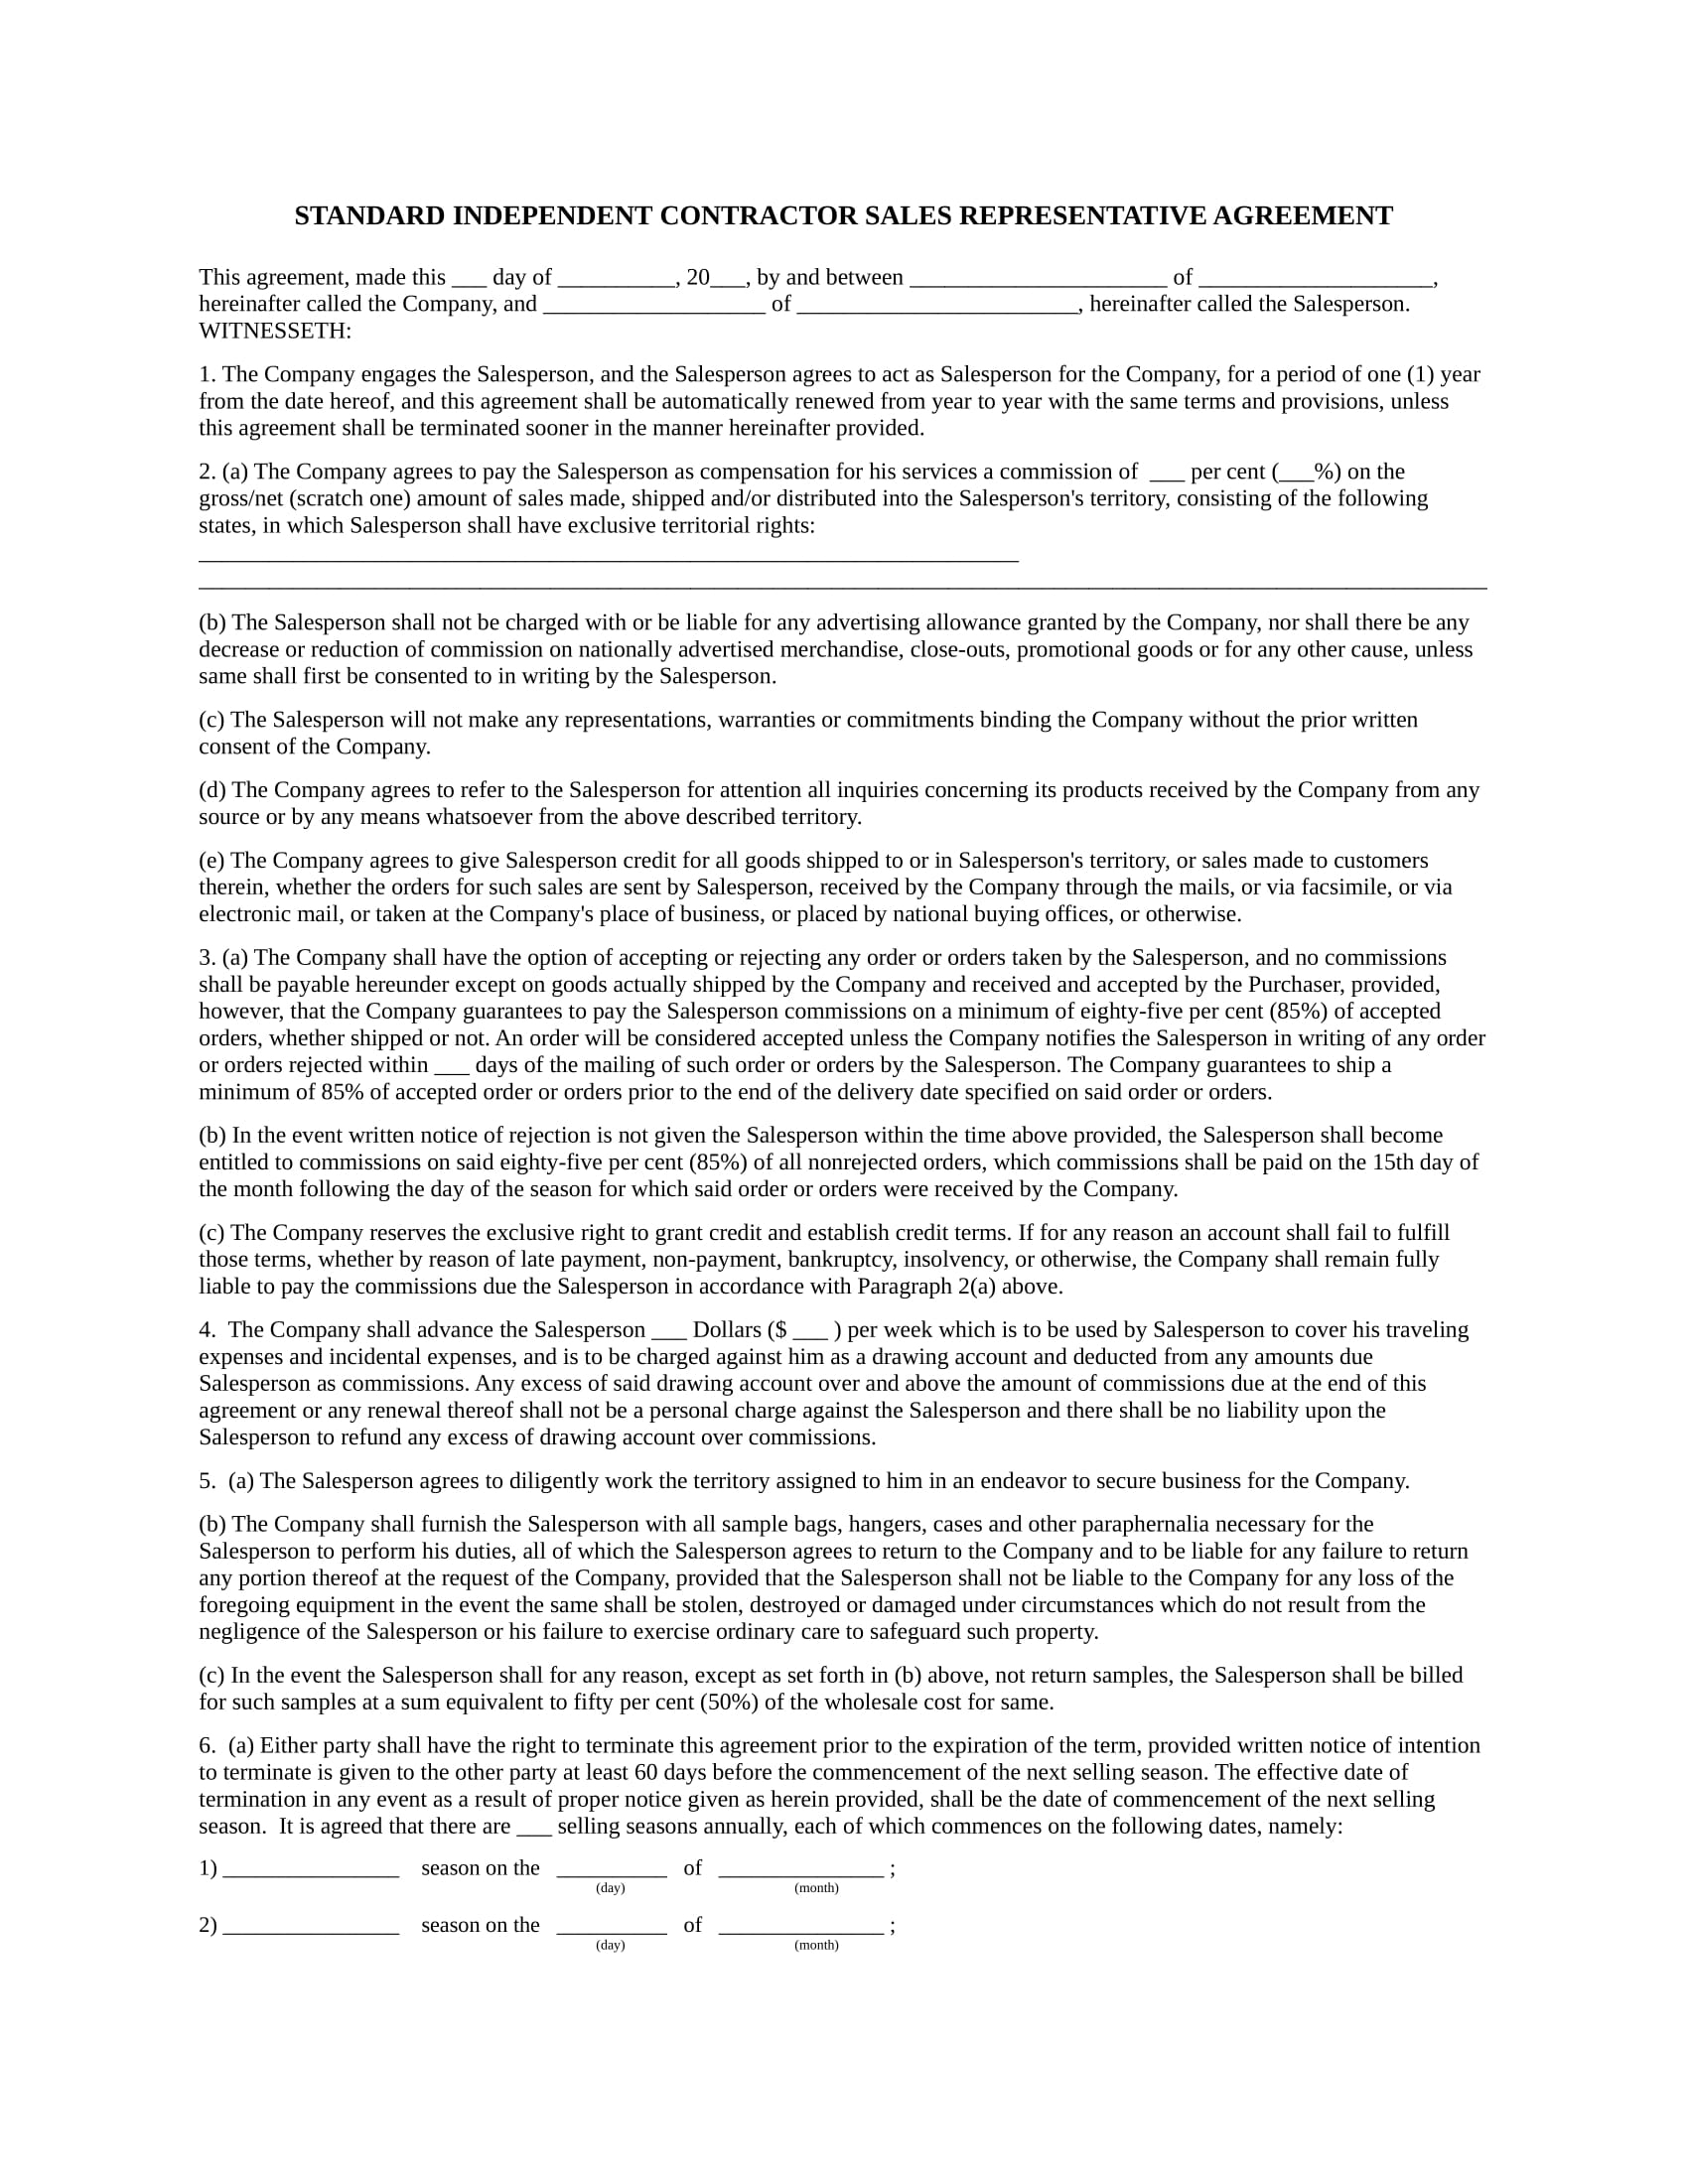 Sales Representative Agreement 3 Salesperson Agreement Contract Forms Pdf Doc